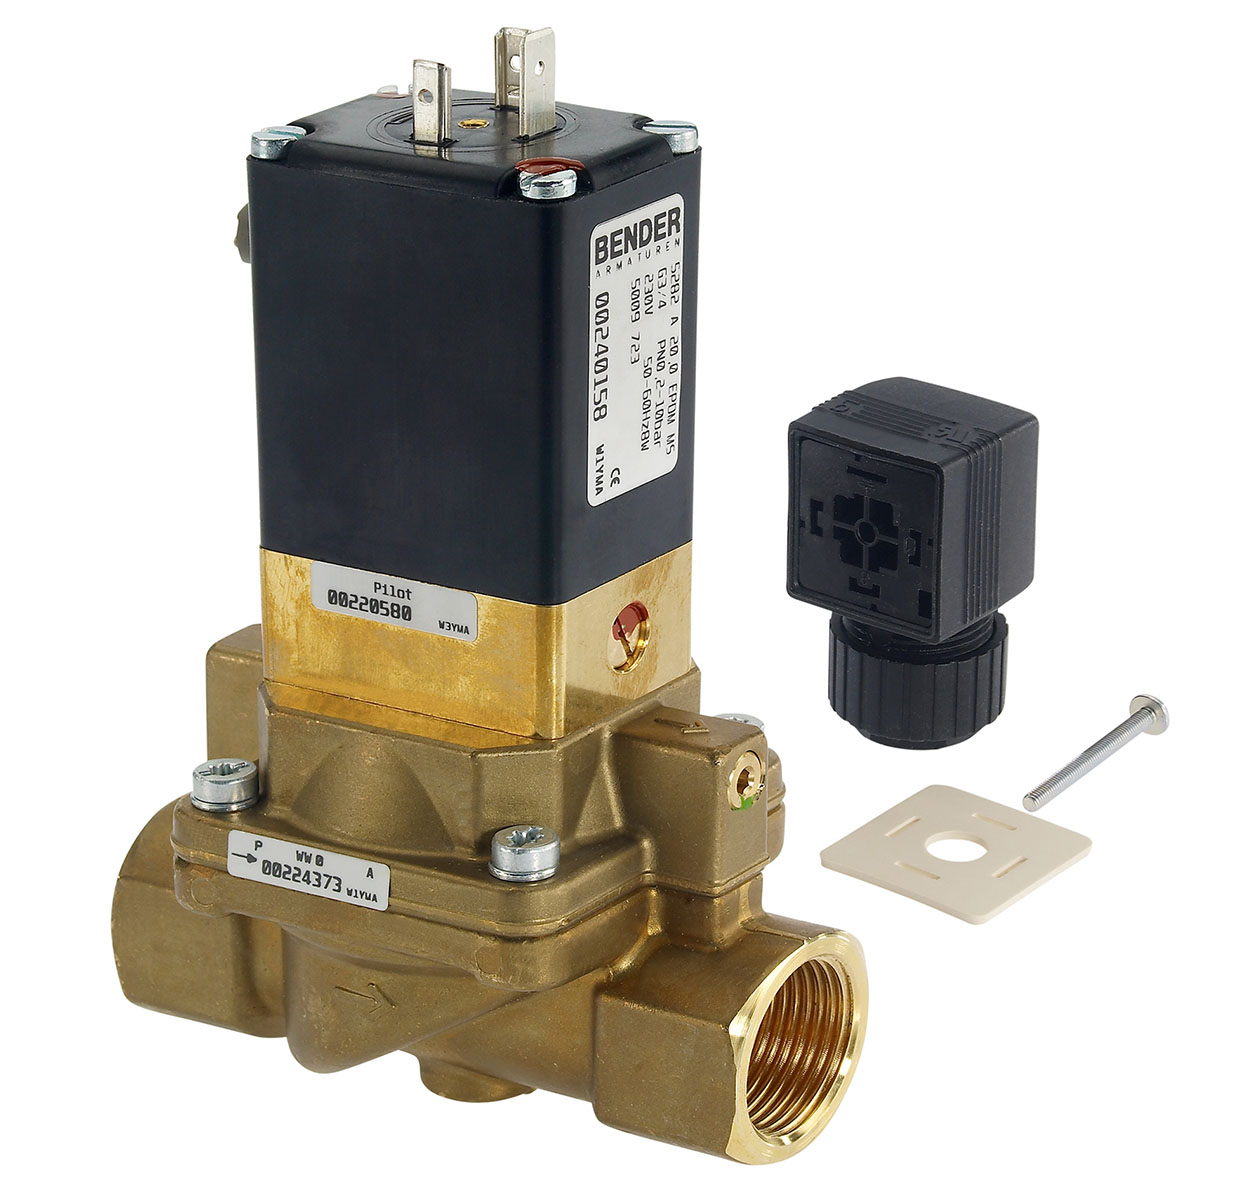 5009735 - 2/2 way solenoid valve normally closed for lightly soiled fluids Type 7; female thread